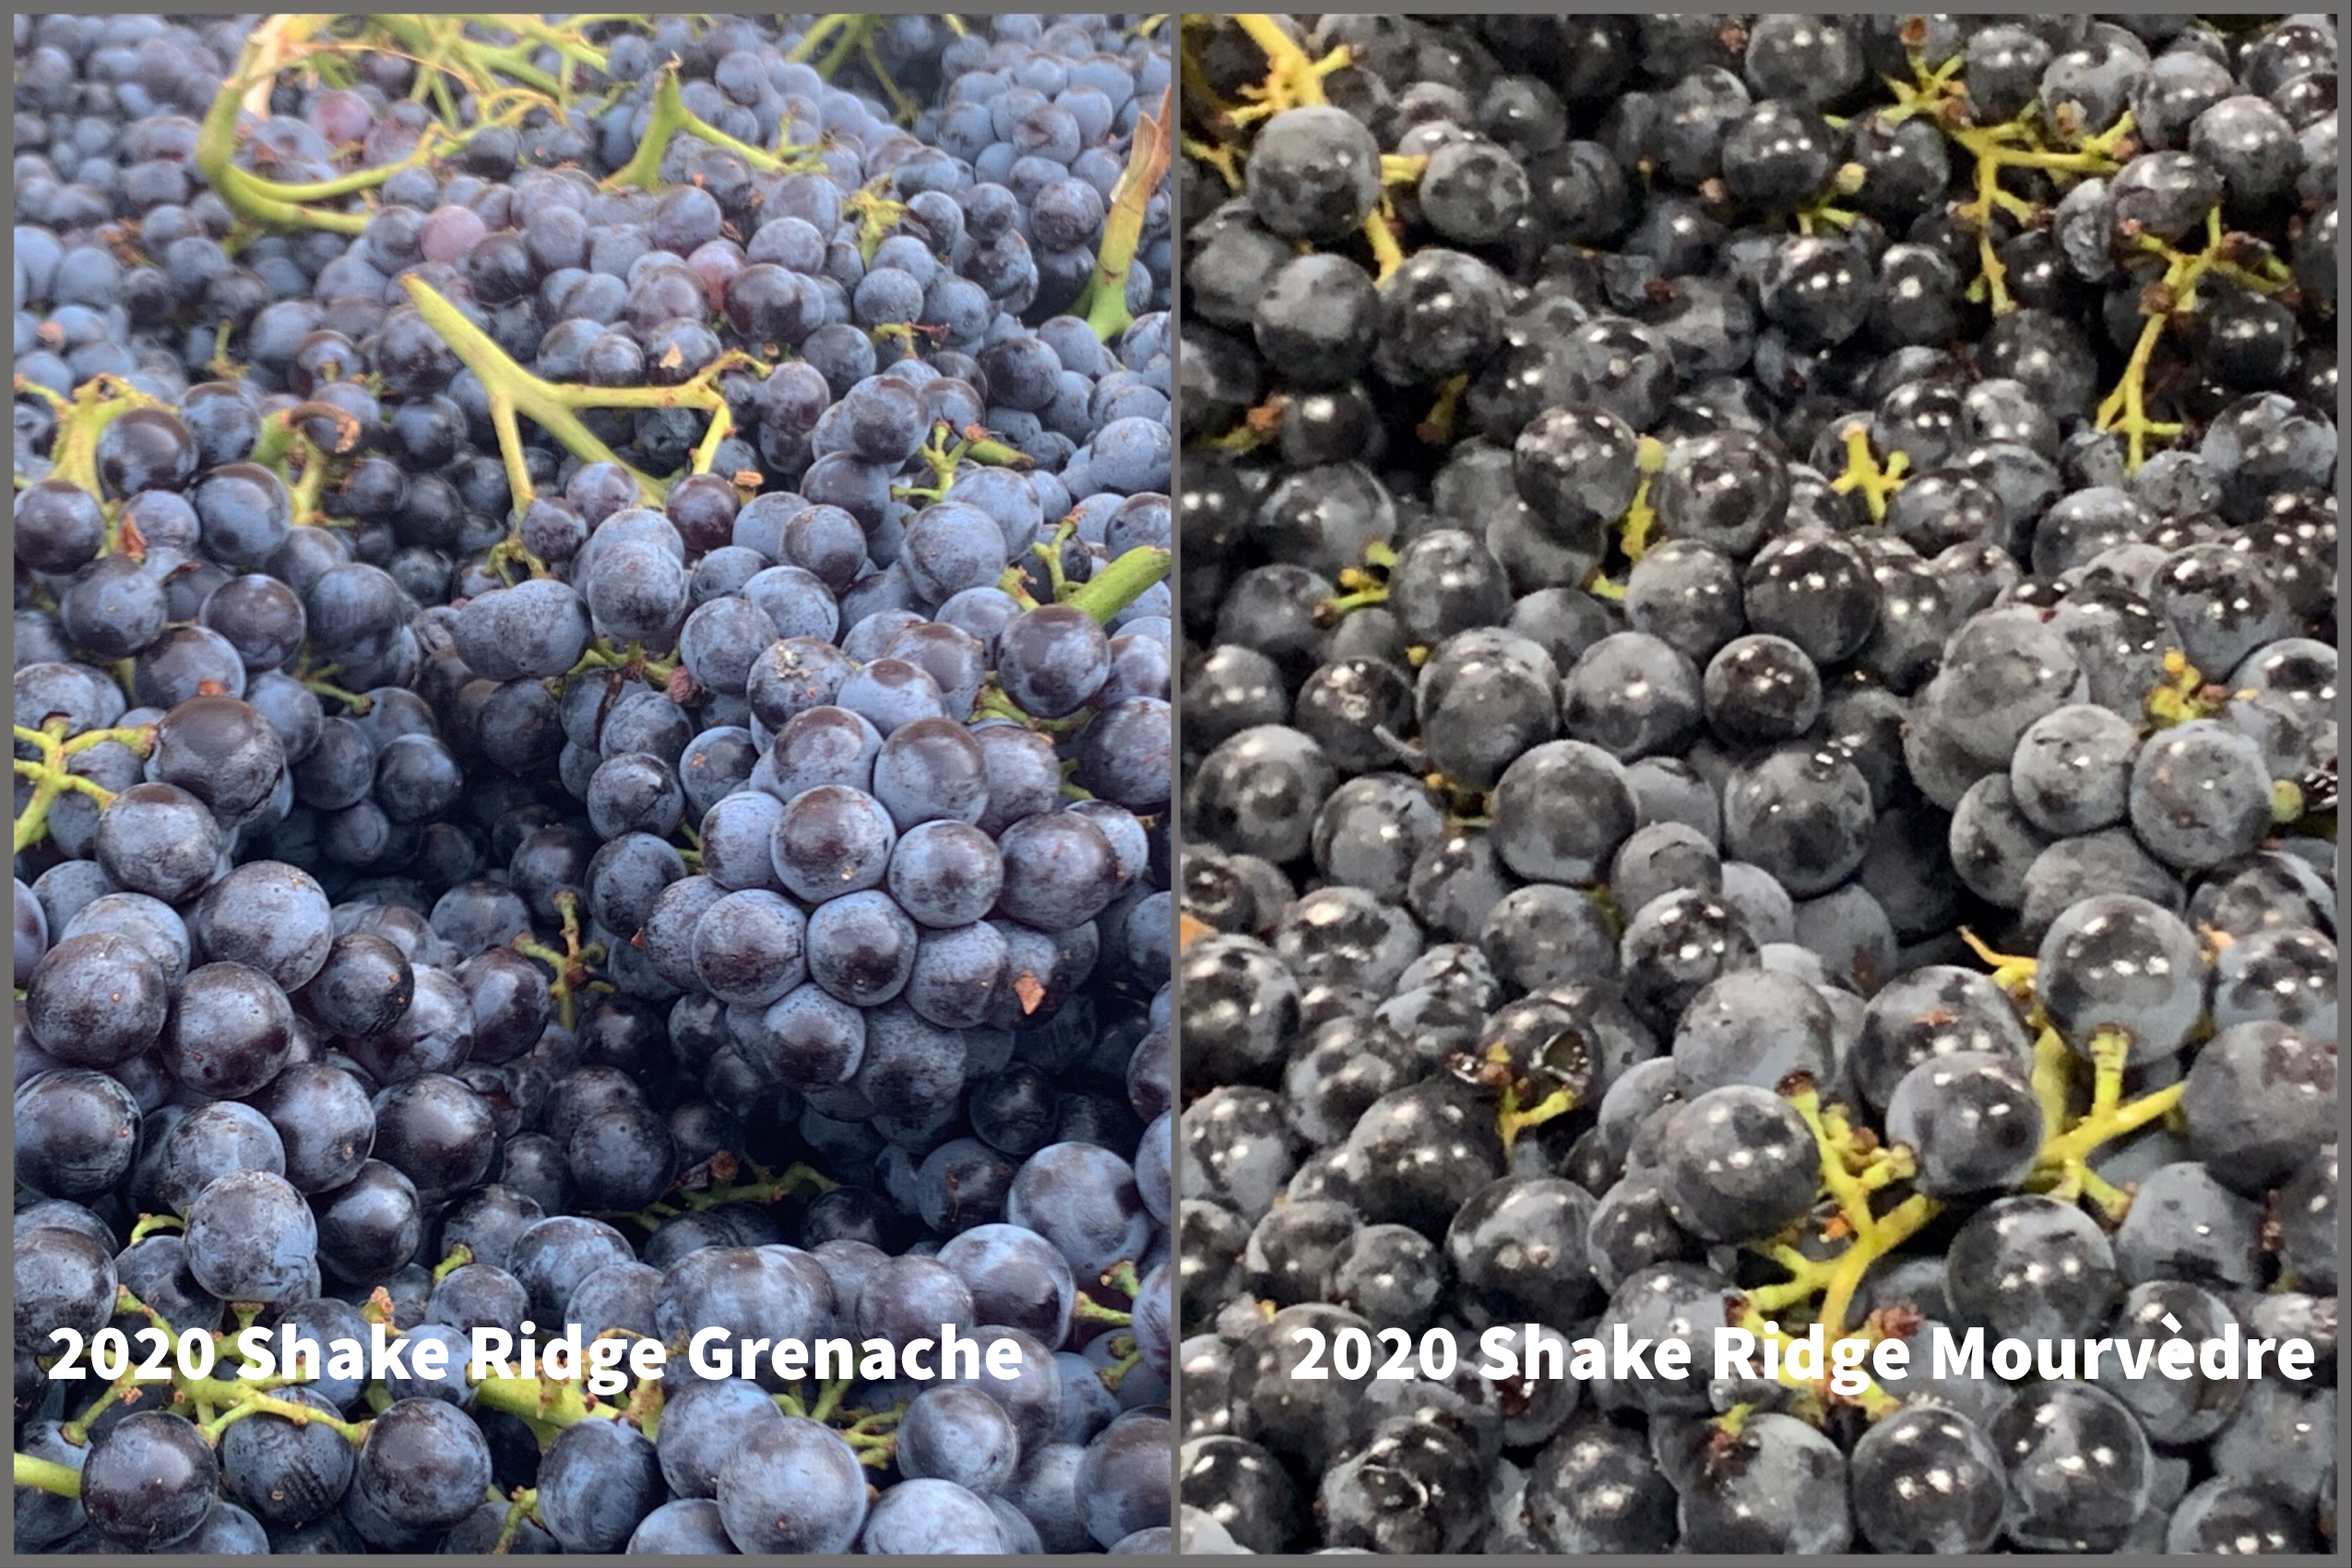 freshly harvested grenache and mourvedre grapes